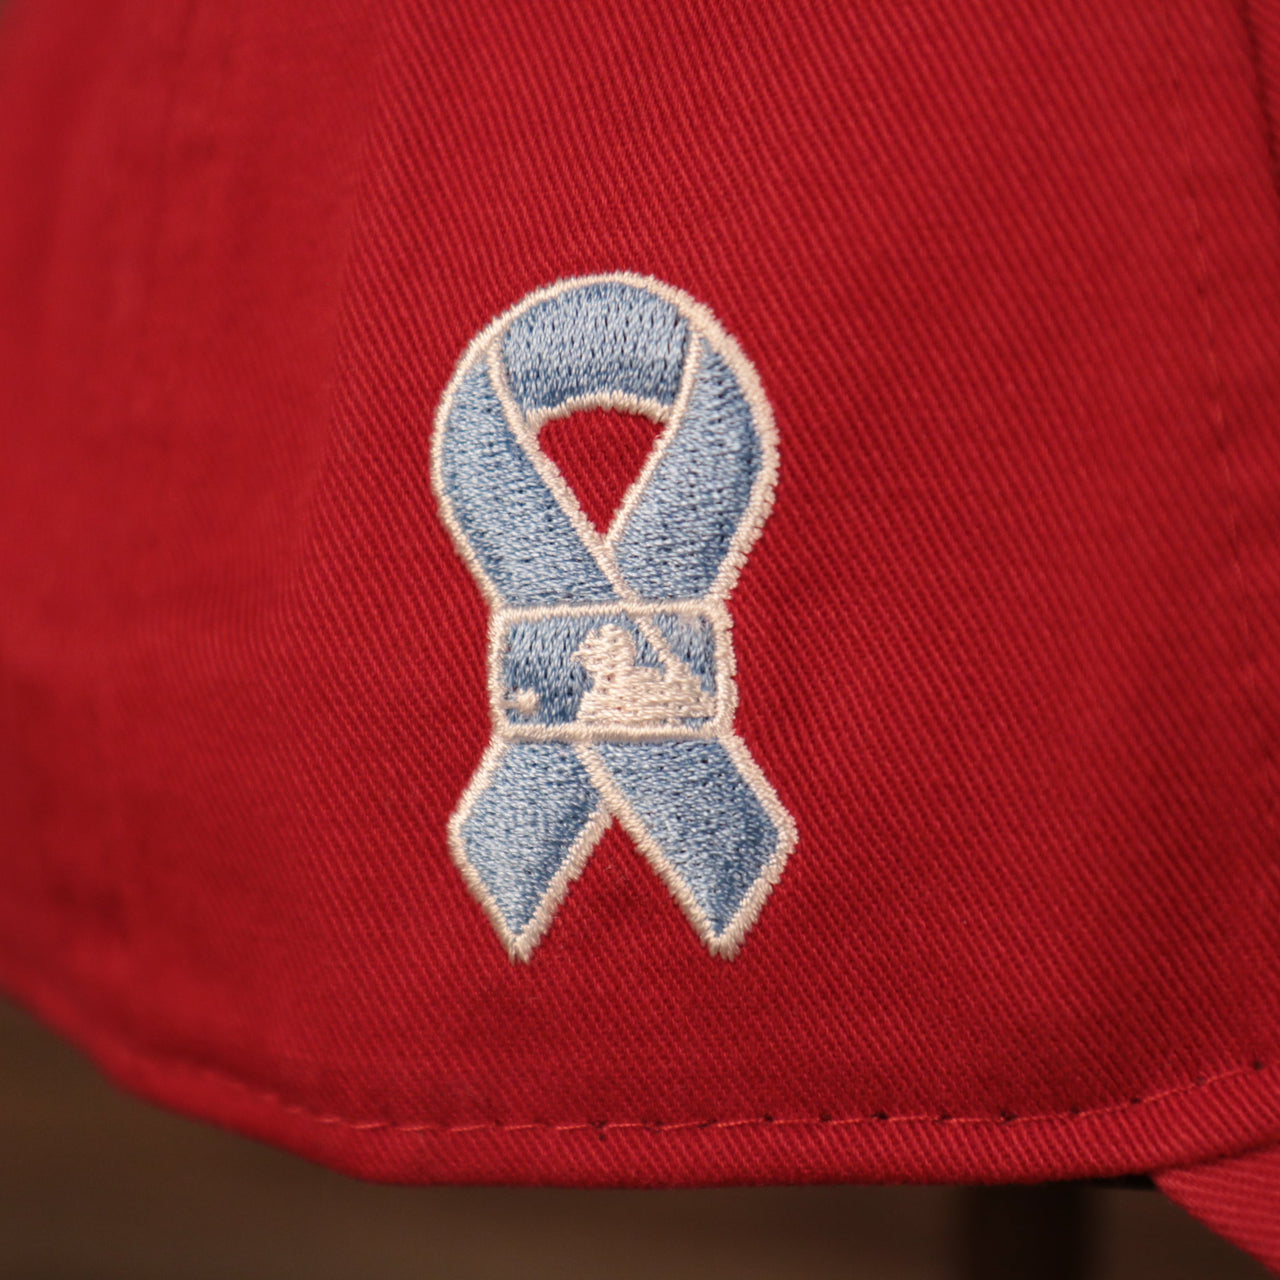 A close up shot of the light blue ribbon patch on the wearer's right side of the red Fightin' Phils fathers day 2021 920 cap by New Era.